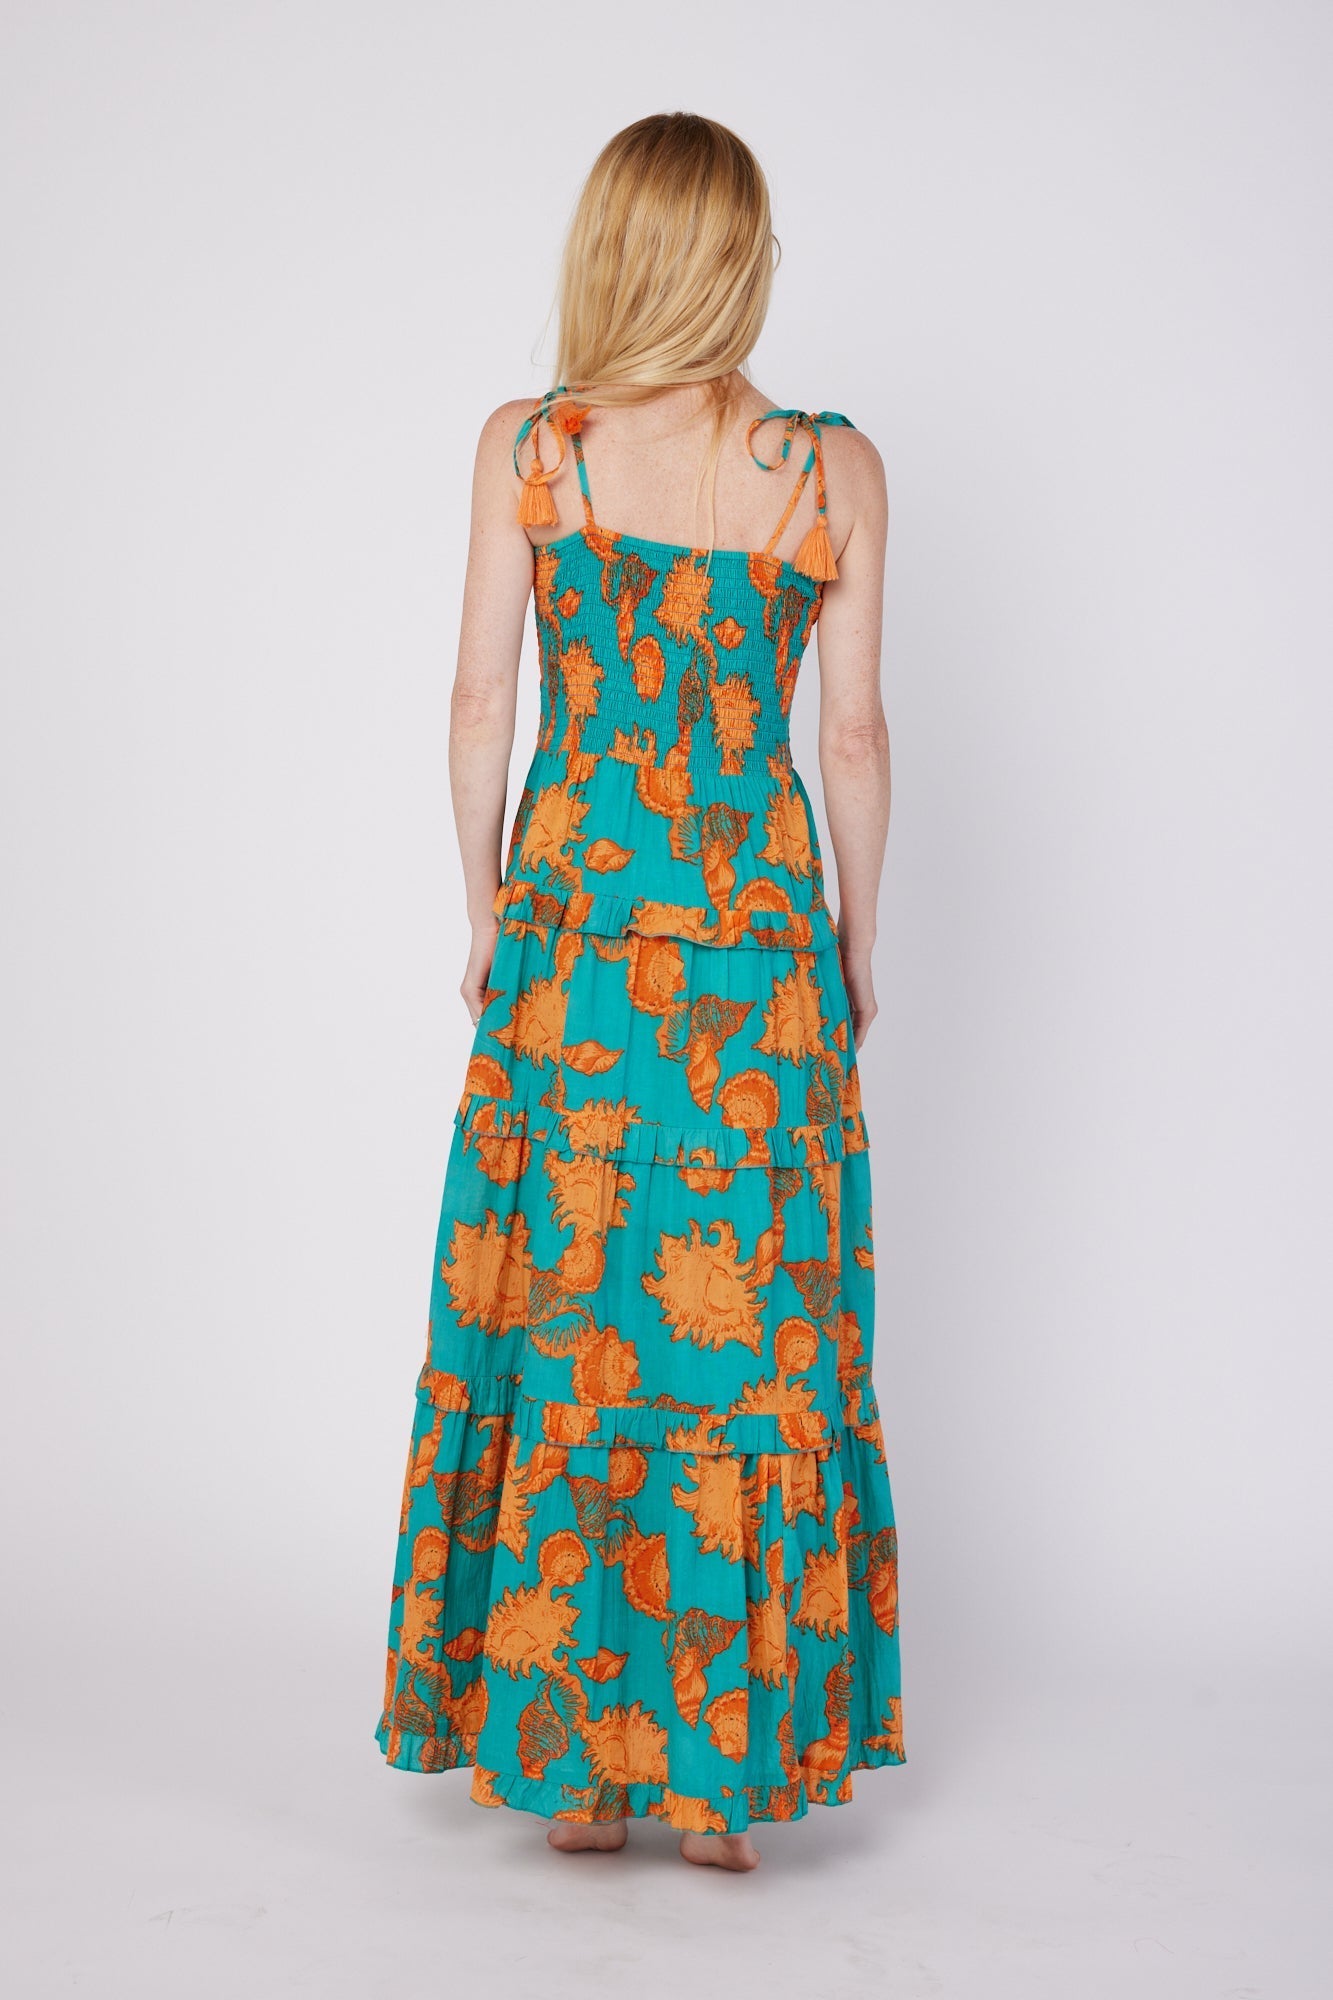 ModaPosa Dianora Spaghetti Strap Smocked Tiered Maxi Dress in Turquoise Orange Shells . Discover women's resort dresses and lifestyle clothing inspired by the Mediterranean. Free worldwide shipping available!